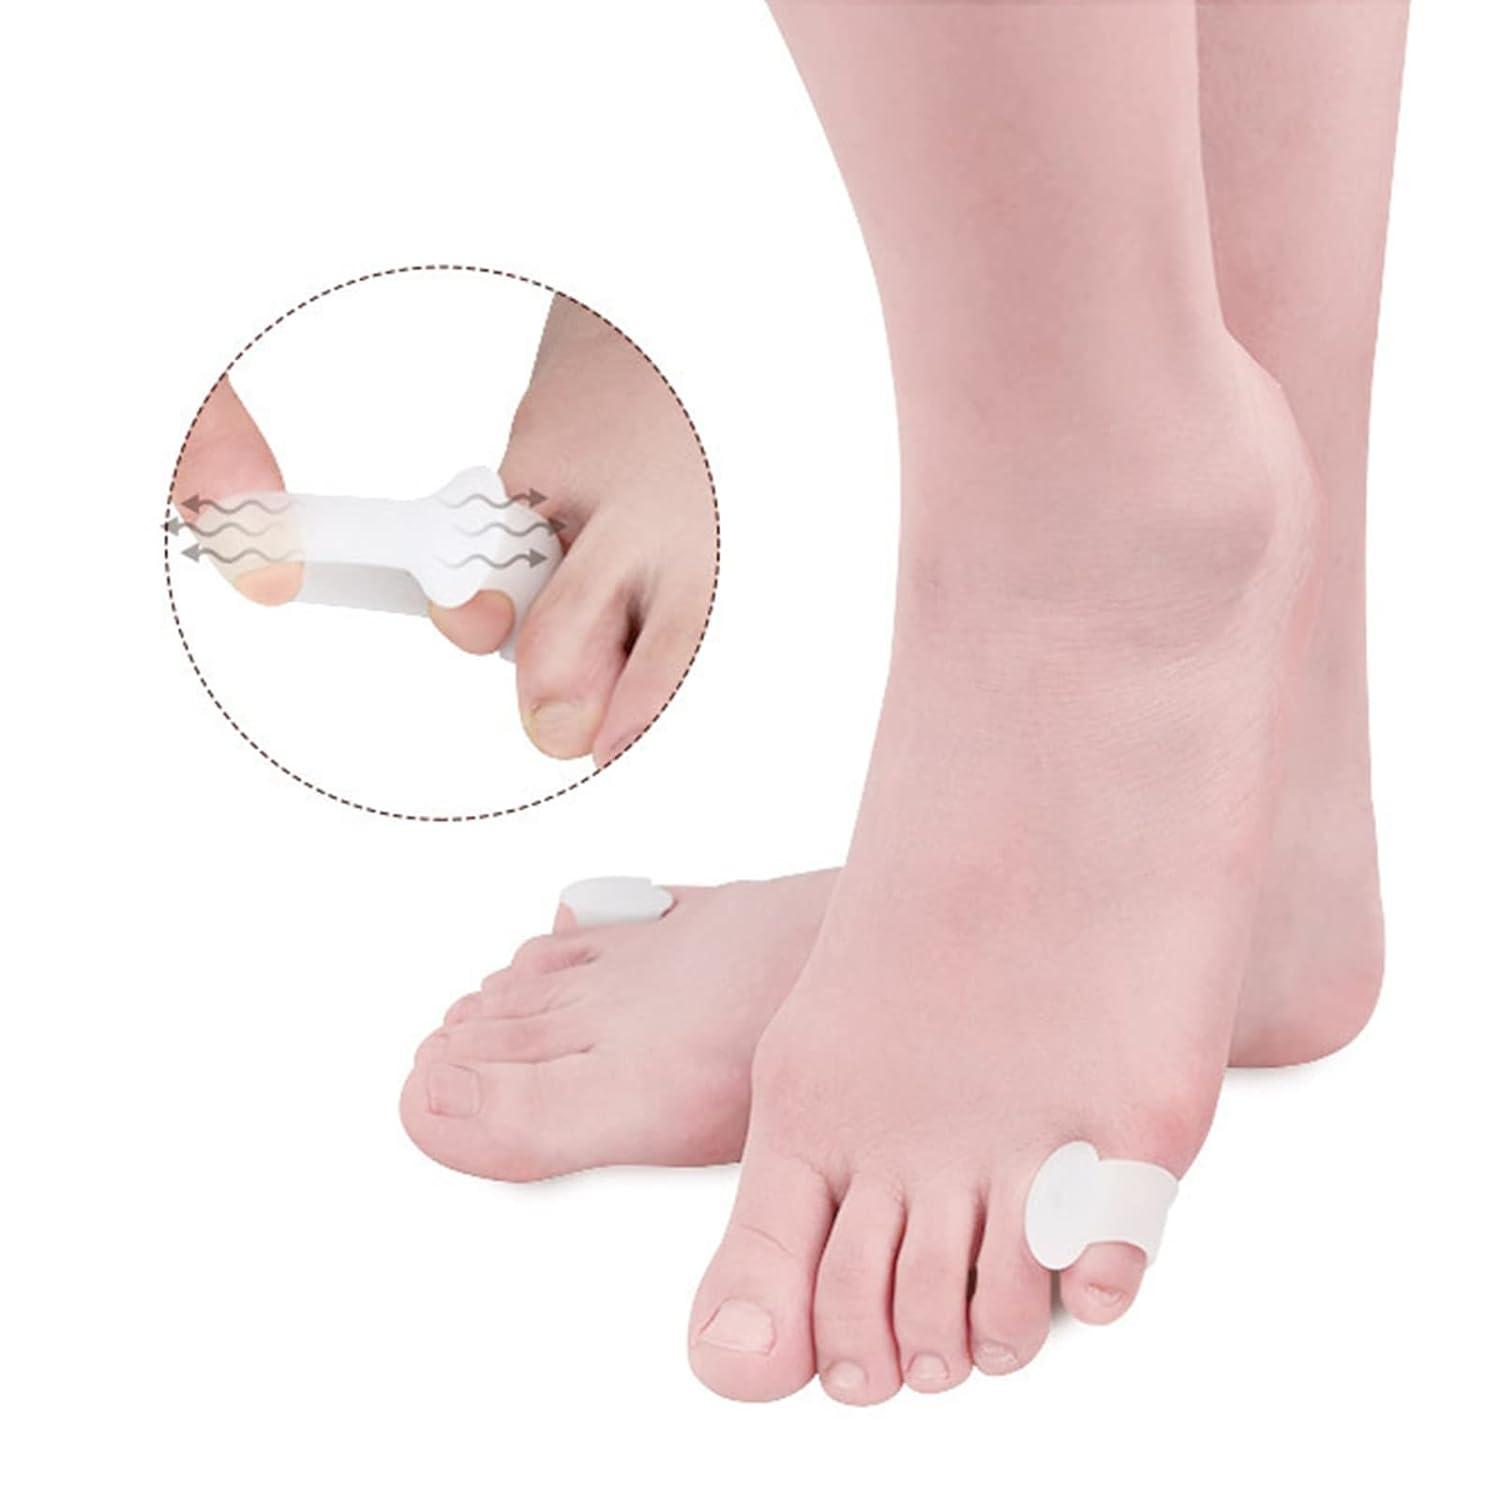 Gel Toe Separators For Overlapping Toe Bunion Corrector Pads For